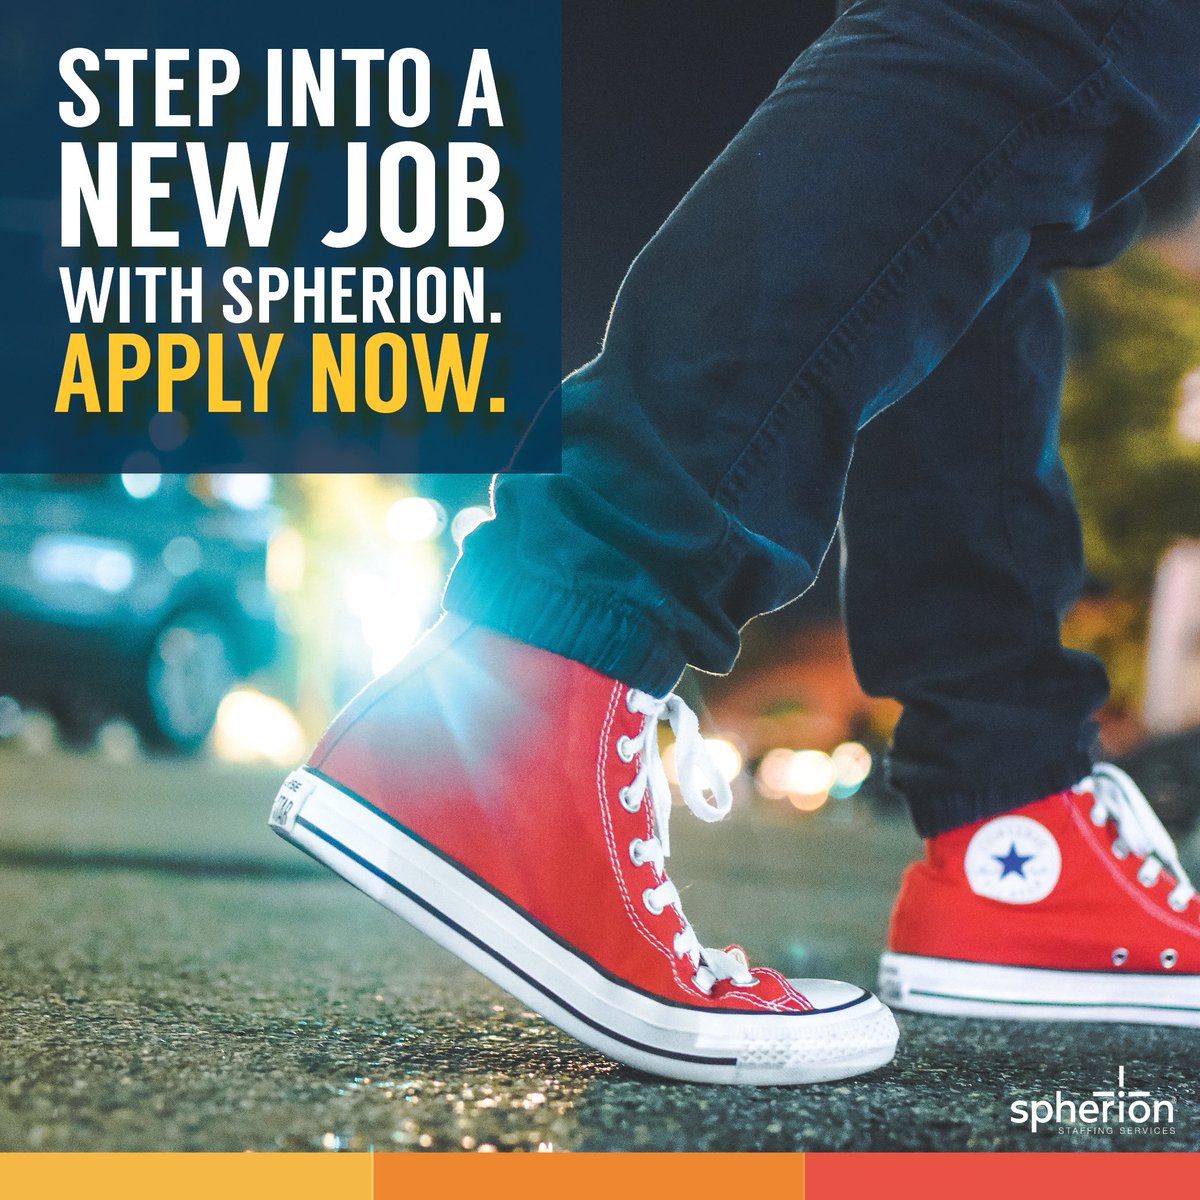 STEP INTO A NEW JOB WITH SPHERION.
Learn more and apply here: bit.ly/2ndOjsq
#newjob #jobfair #jobinterivew #workwithspherion 
**CLOSED MONDAY FOR LABOR DAY**
OPEN INTERVIEWS: 
Tuesday - Thursday | 9:30am - 1:30pm 
📍8454 Lockwood Ridge Rd
📞 (941) 351-0656